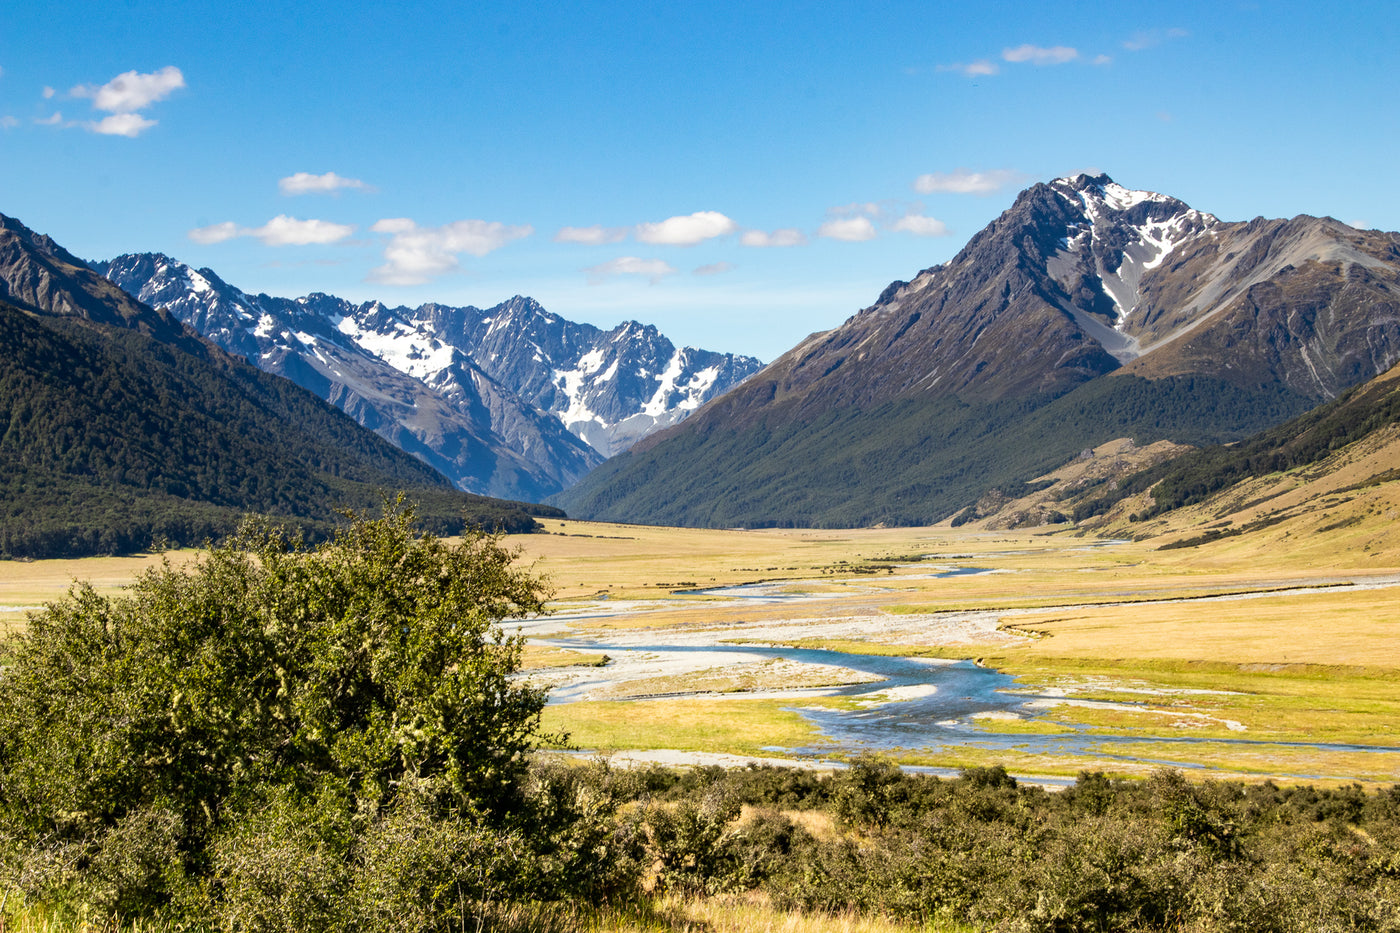 7 of New Zealand's "Great Day Walks"